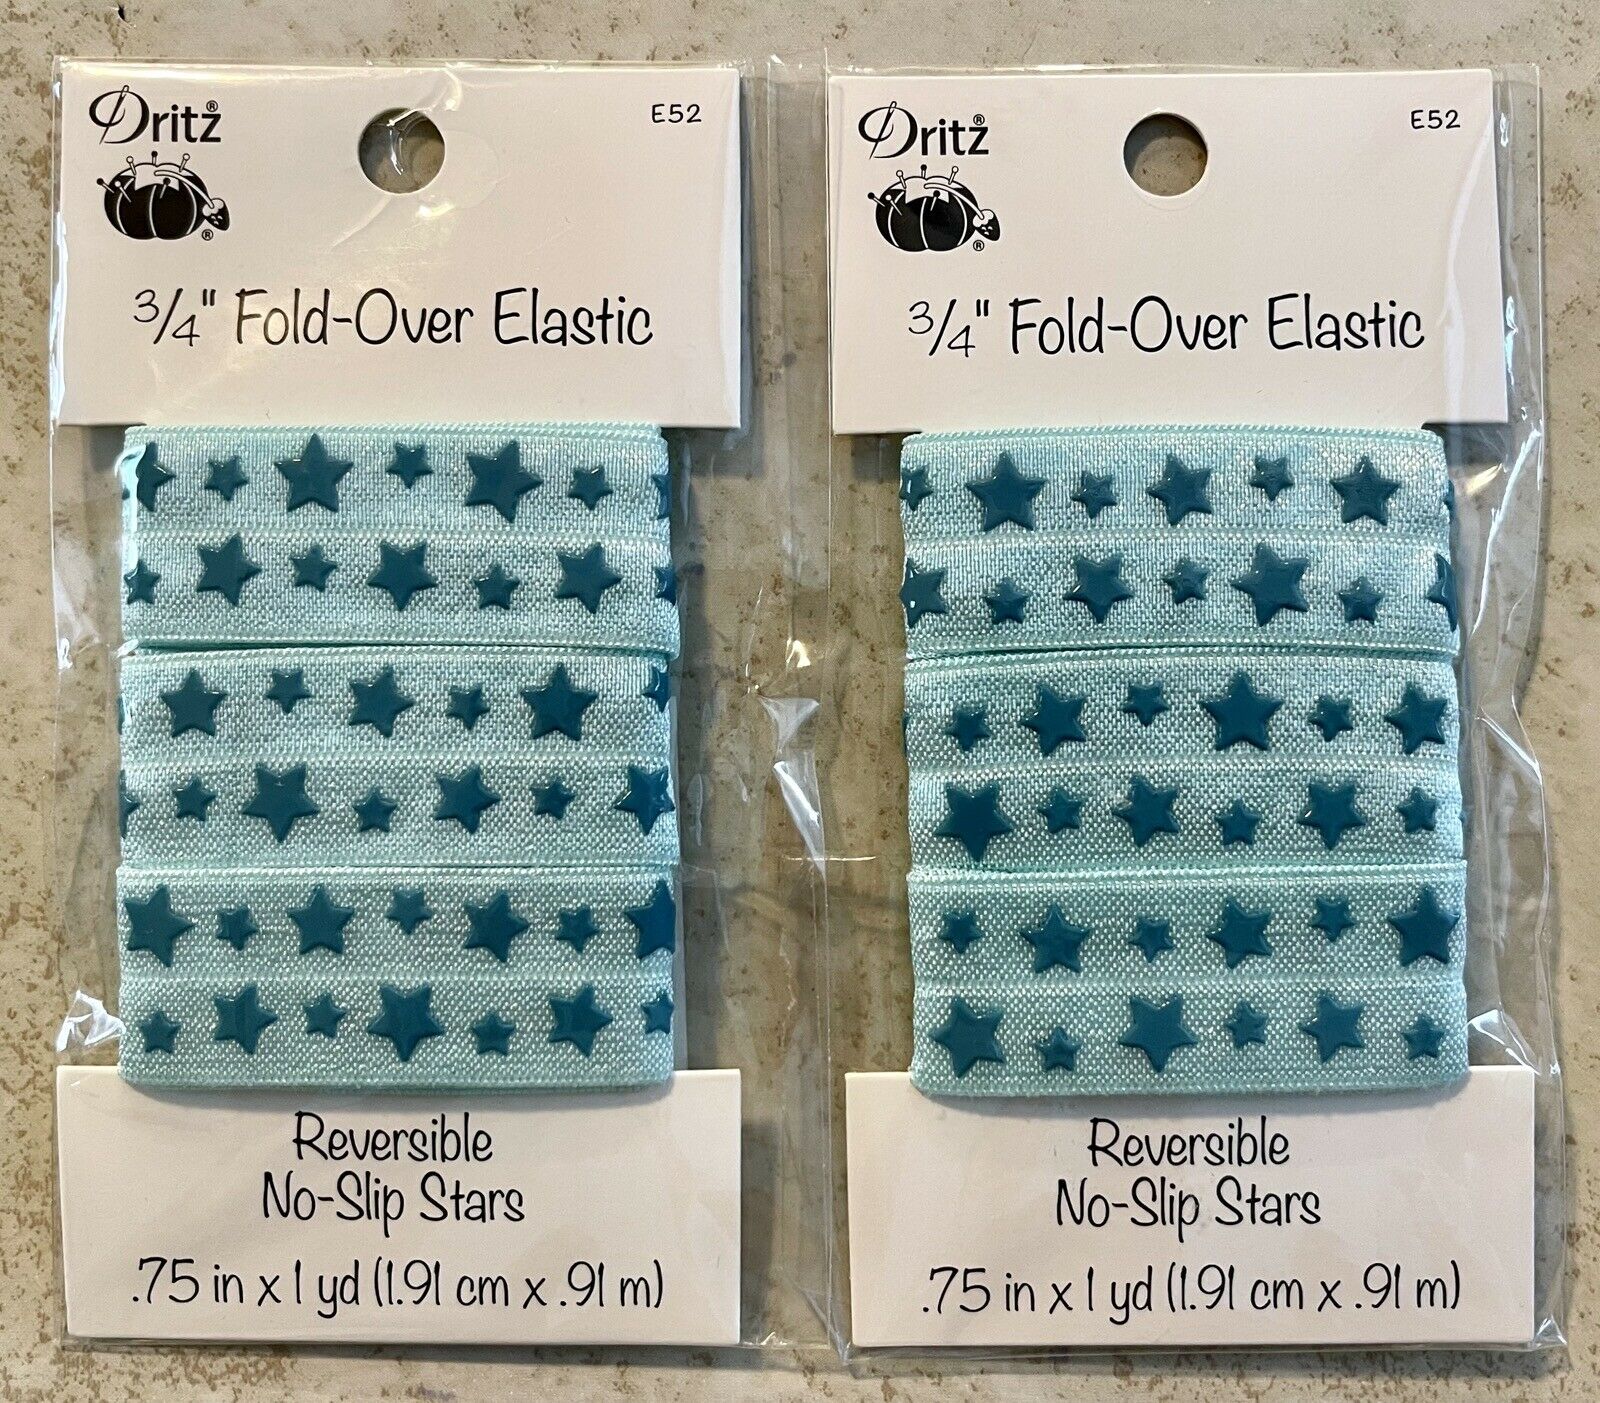 Dritz Fold-over Elastic Reversible No-slip Stars Lot 3/4” Wide 2yd Sewing Craft